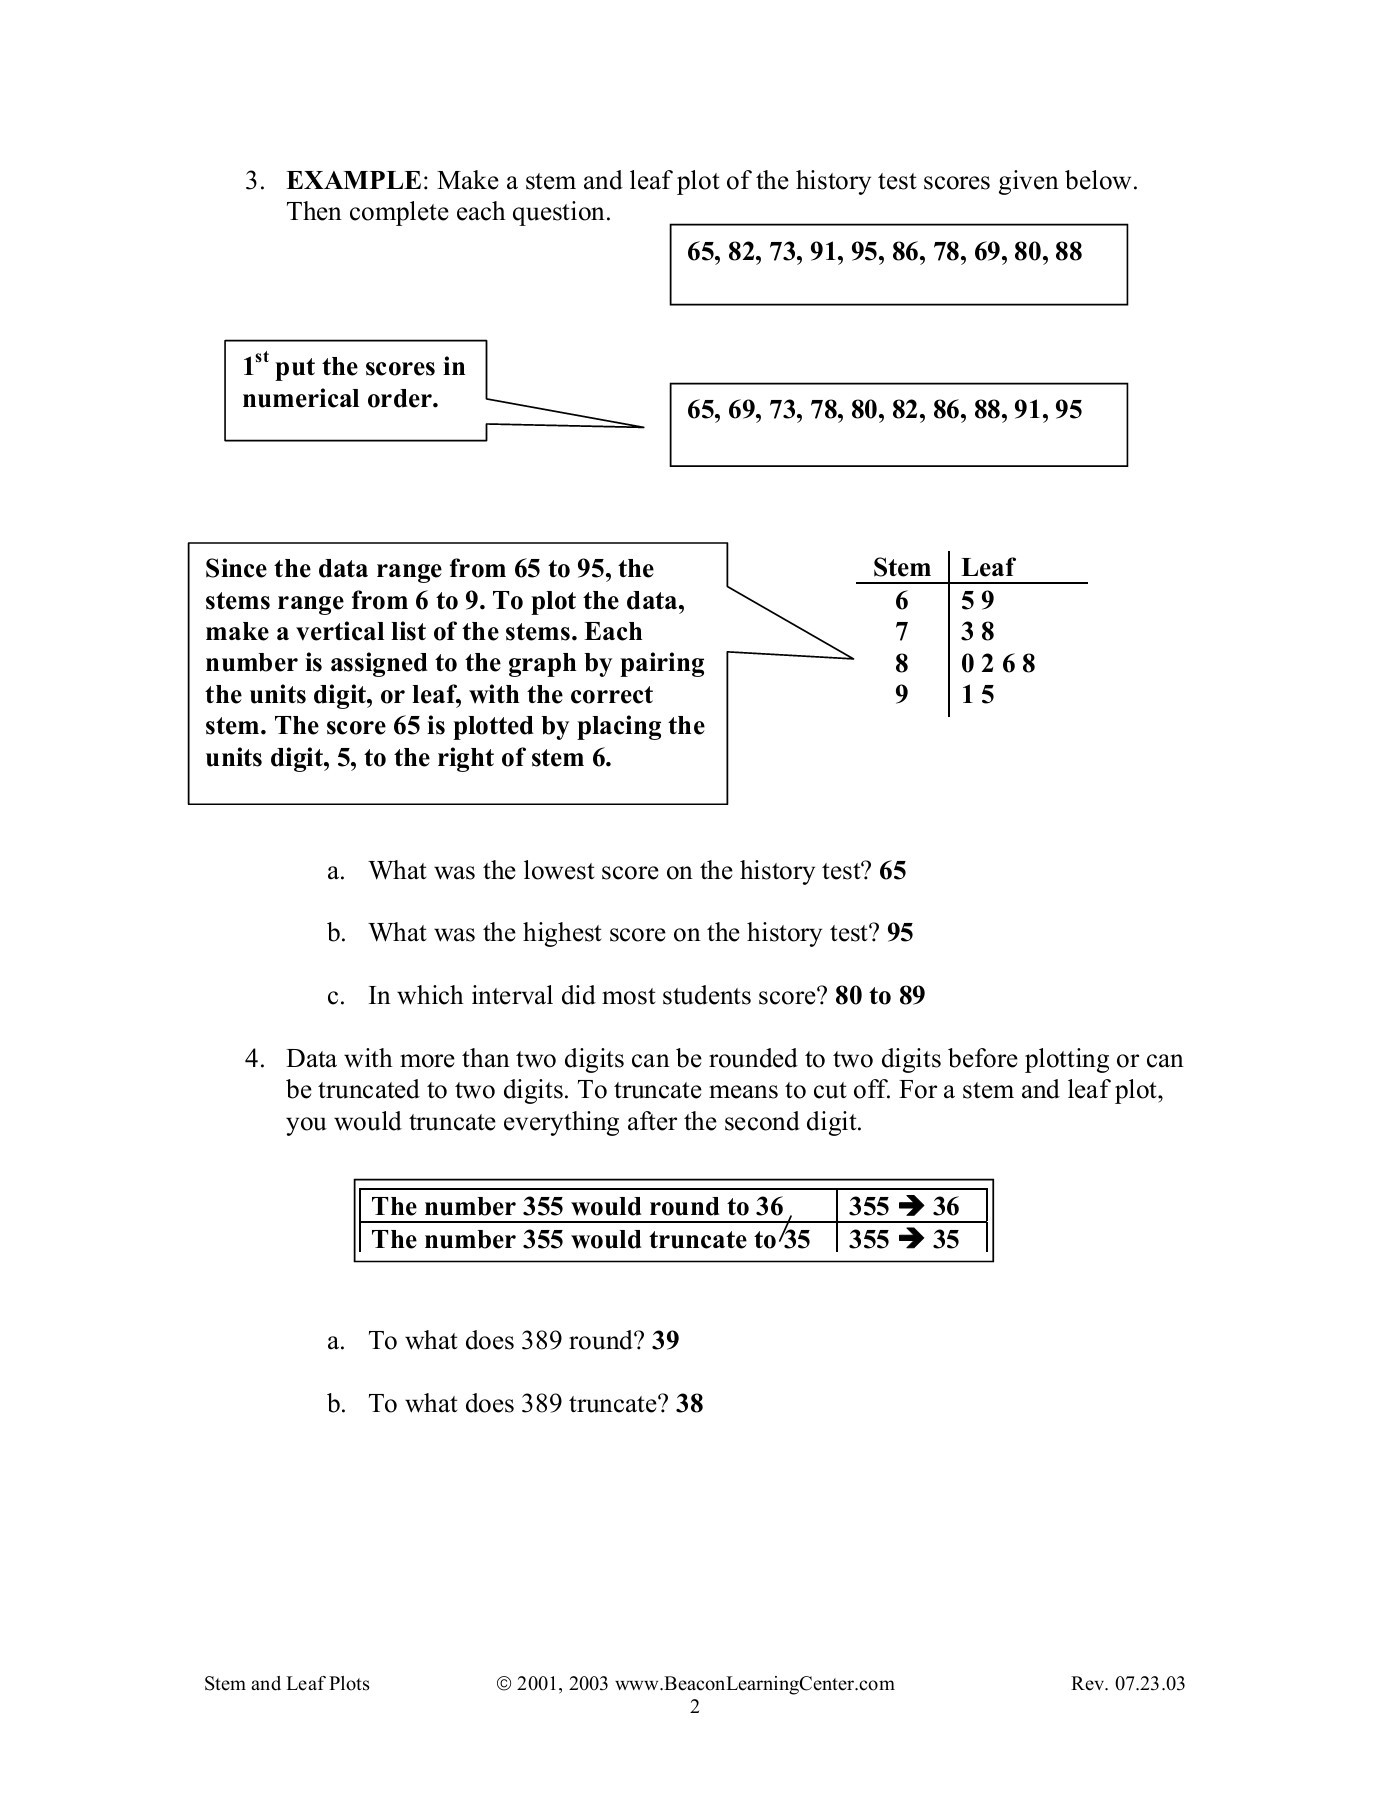 Stem and Leaf Plots Worksheet Stem and Leaf Plots Examples Beacon Learning Center Pages